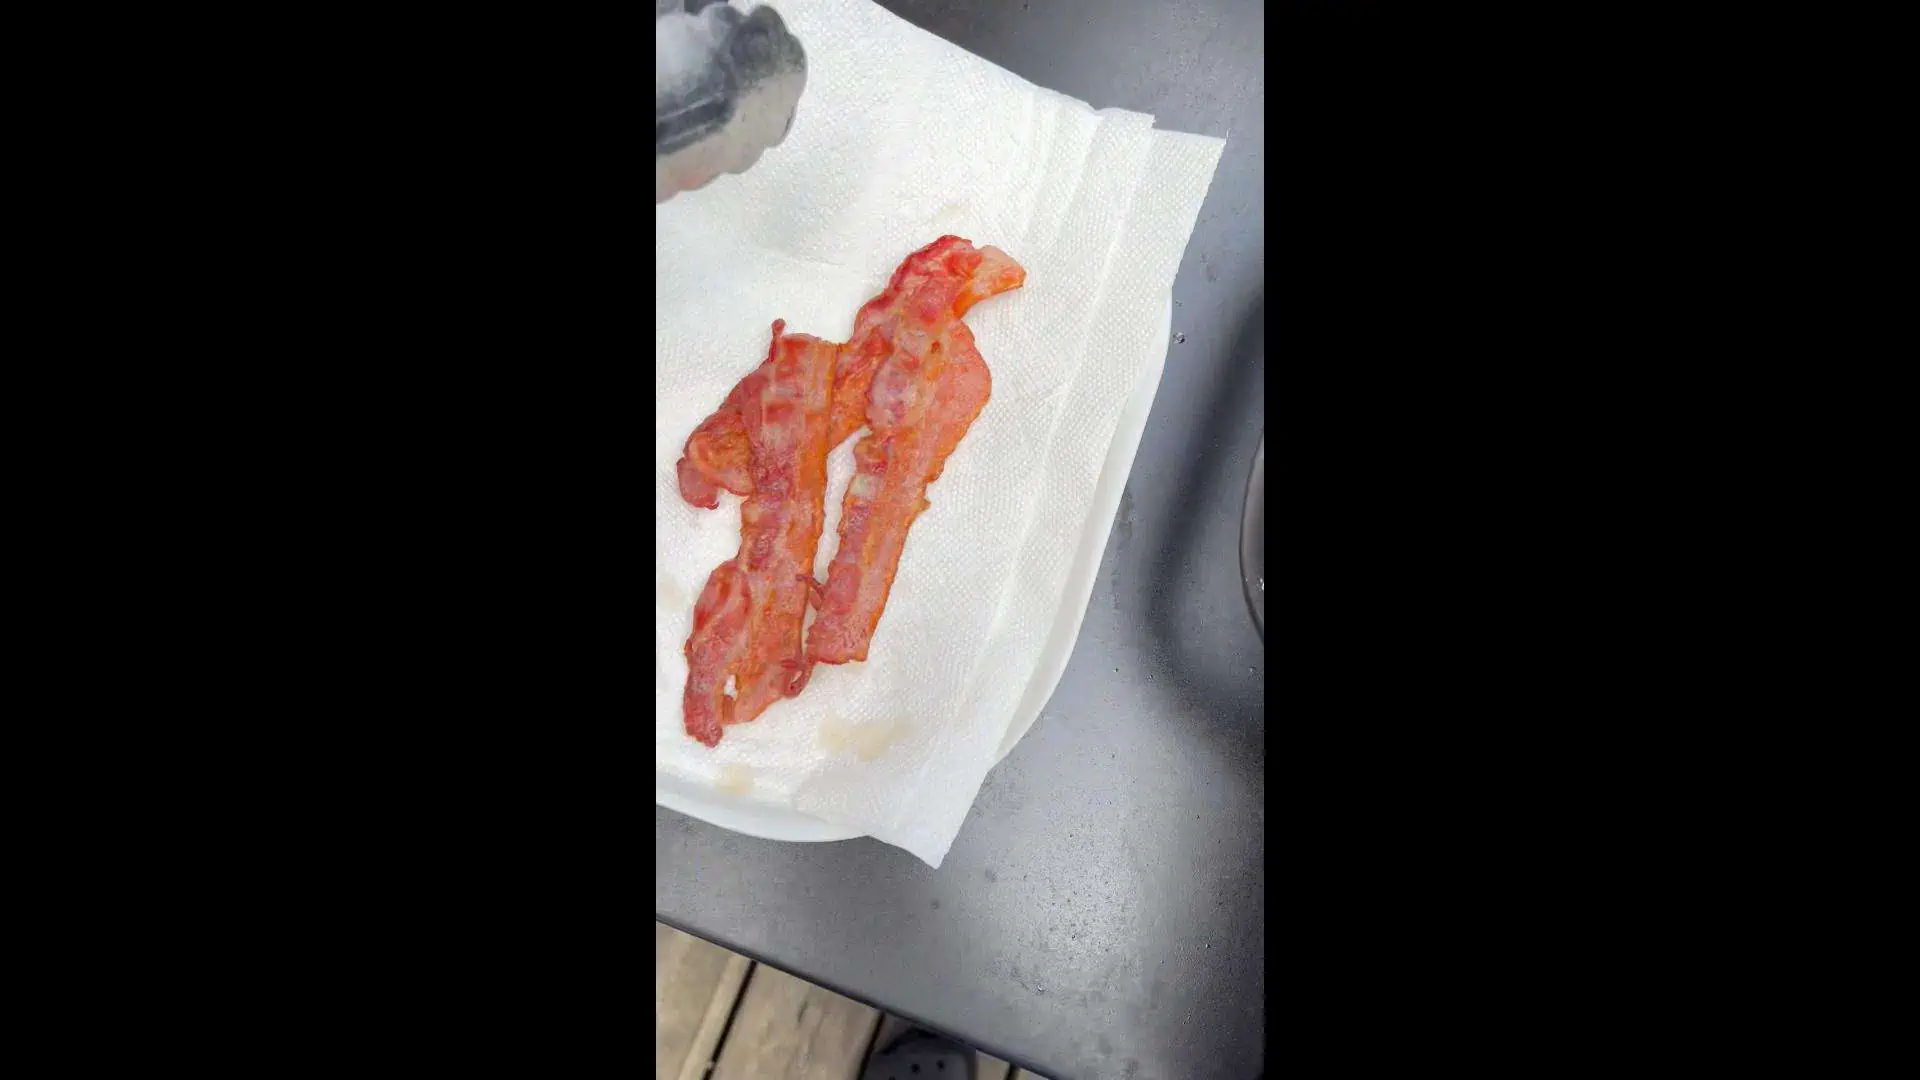 Draining cooked bacon on paper towels.